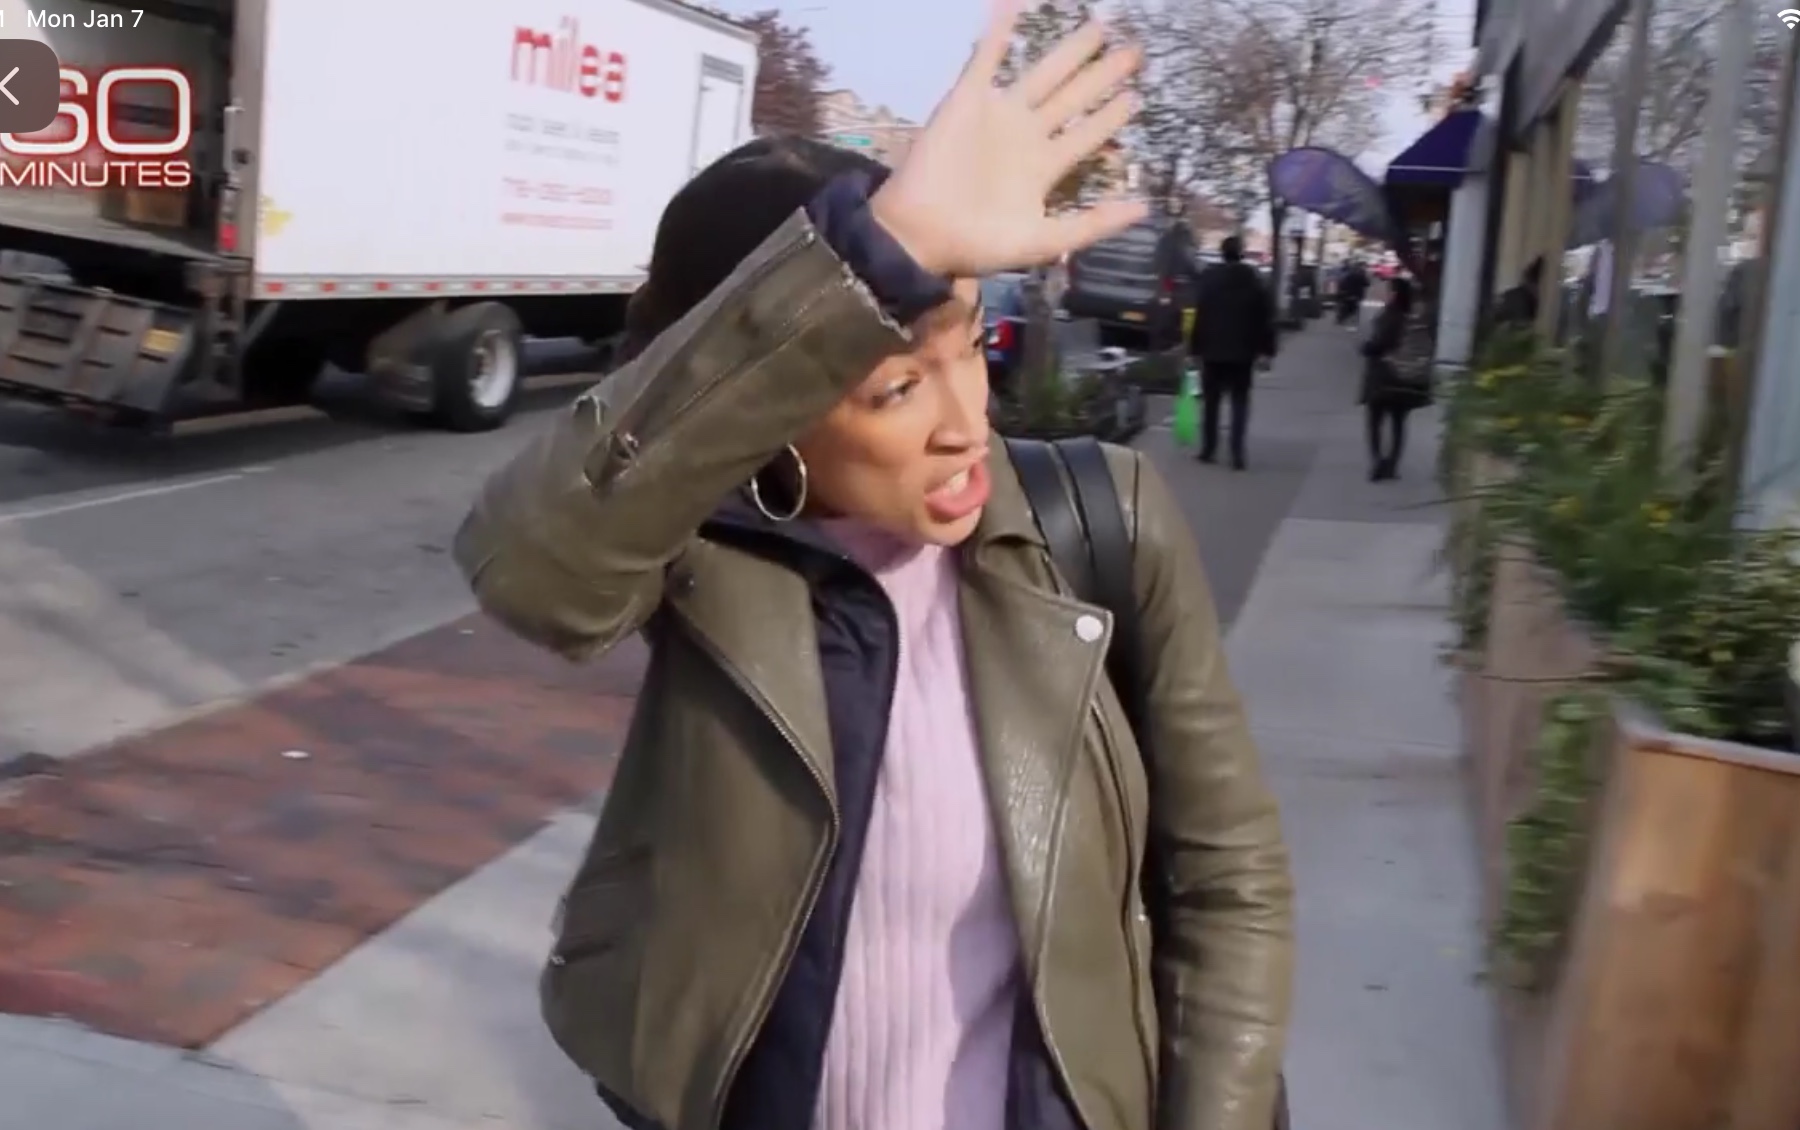 Rep. Alexandria Ocasio-Cortez waves to supporters as she leaves for Capitol Hill. CBS News screenshot, Jan. 6, 2019.